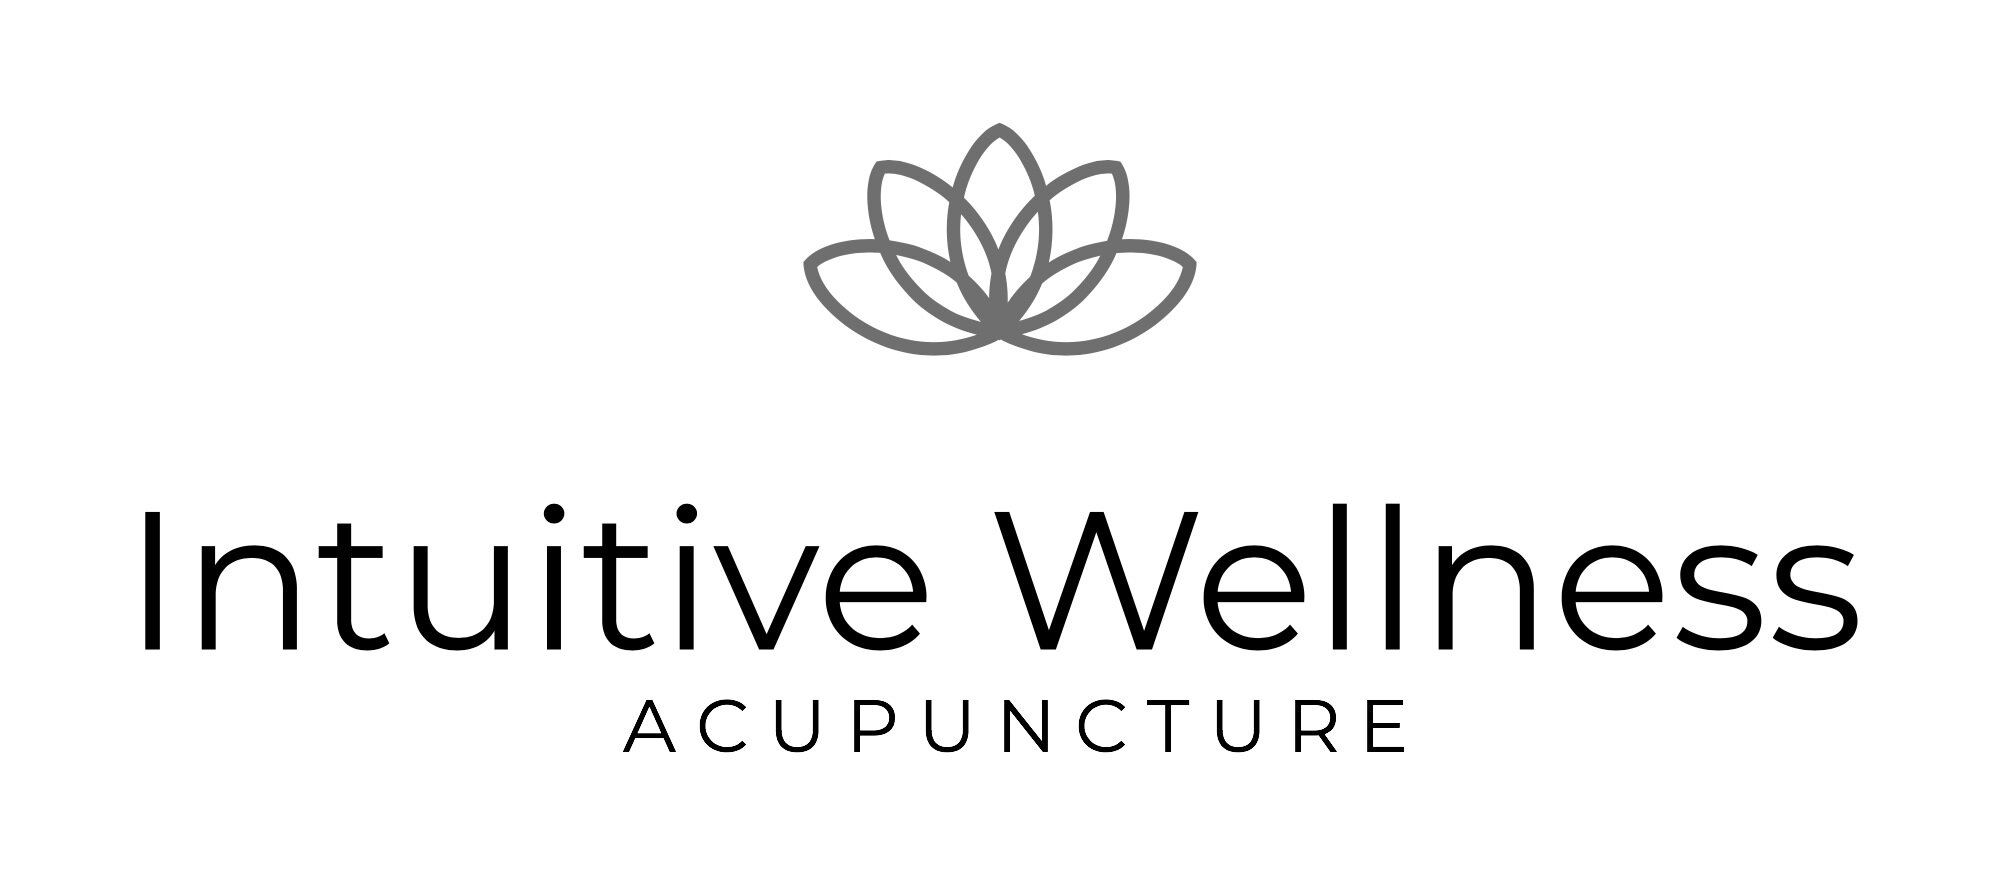 Intuitive Wellness Acupuncture